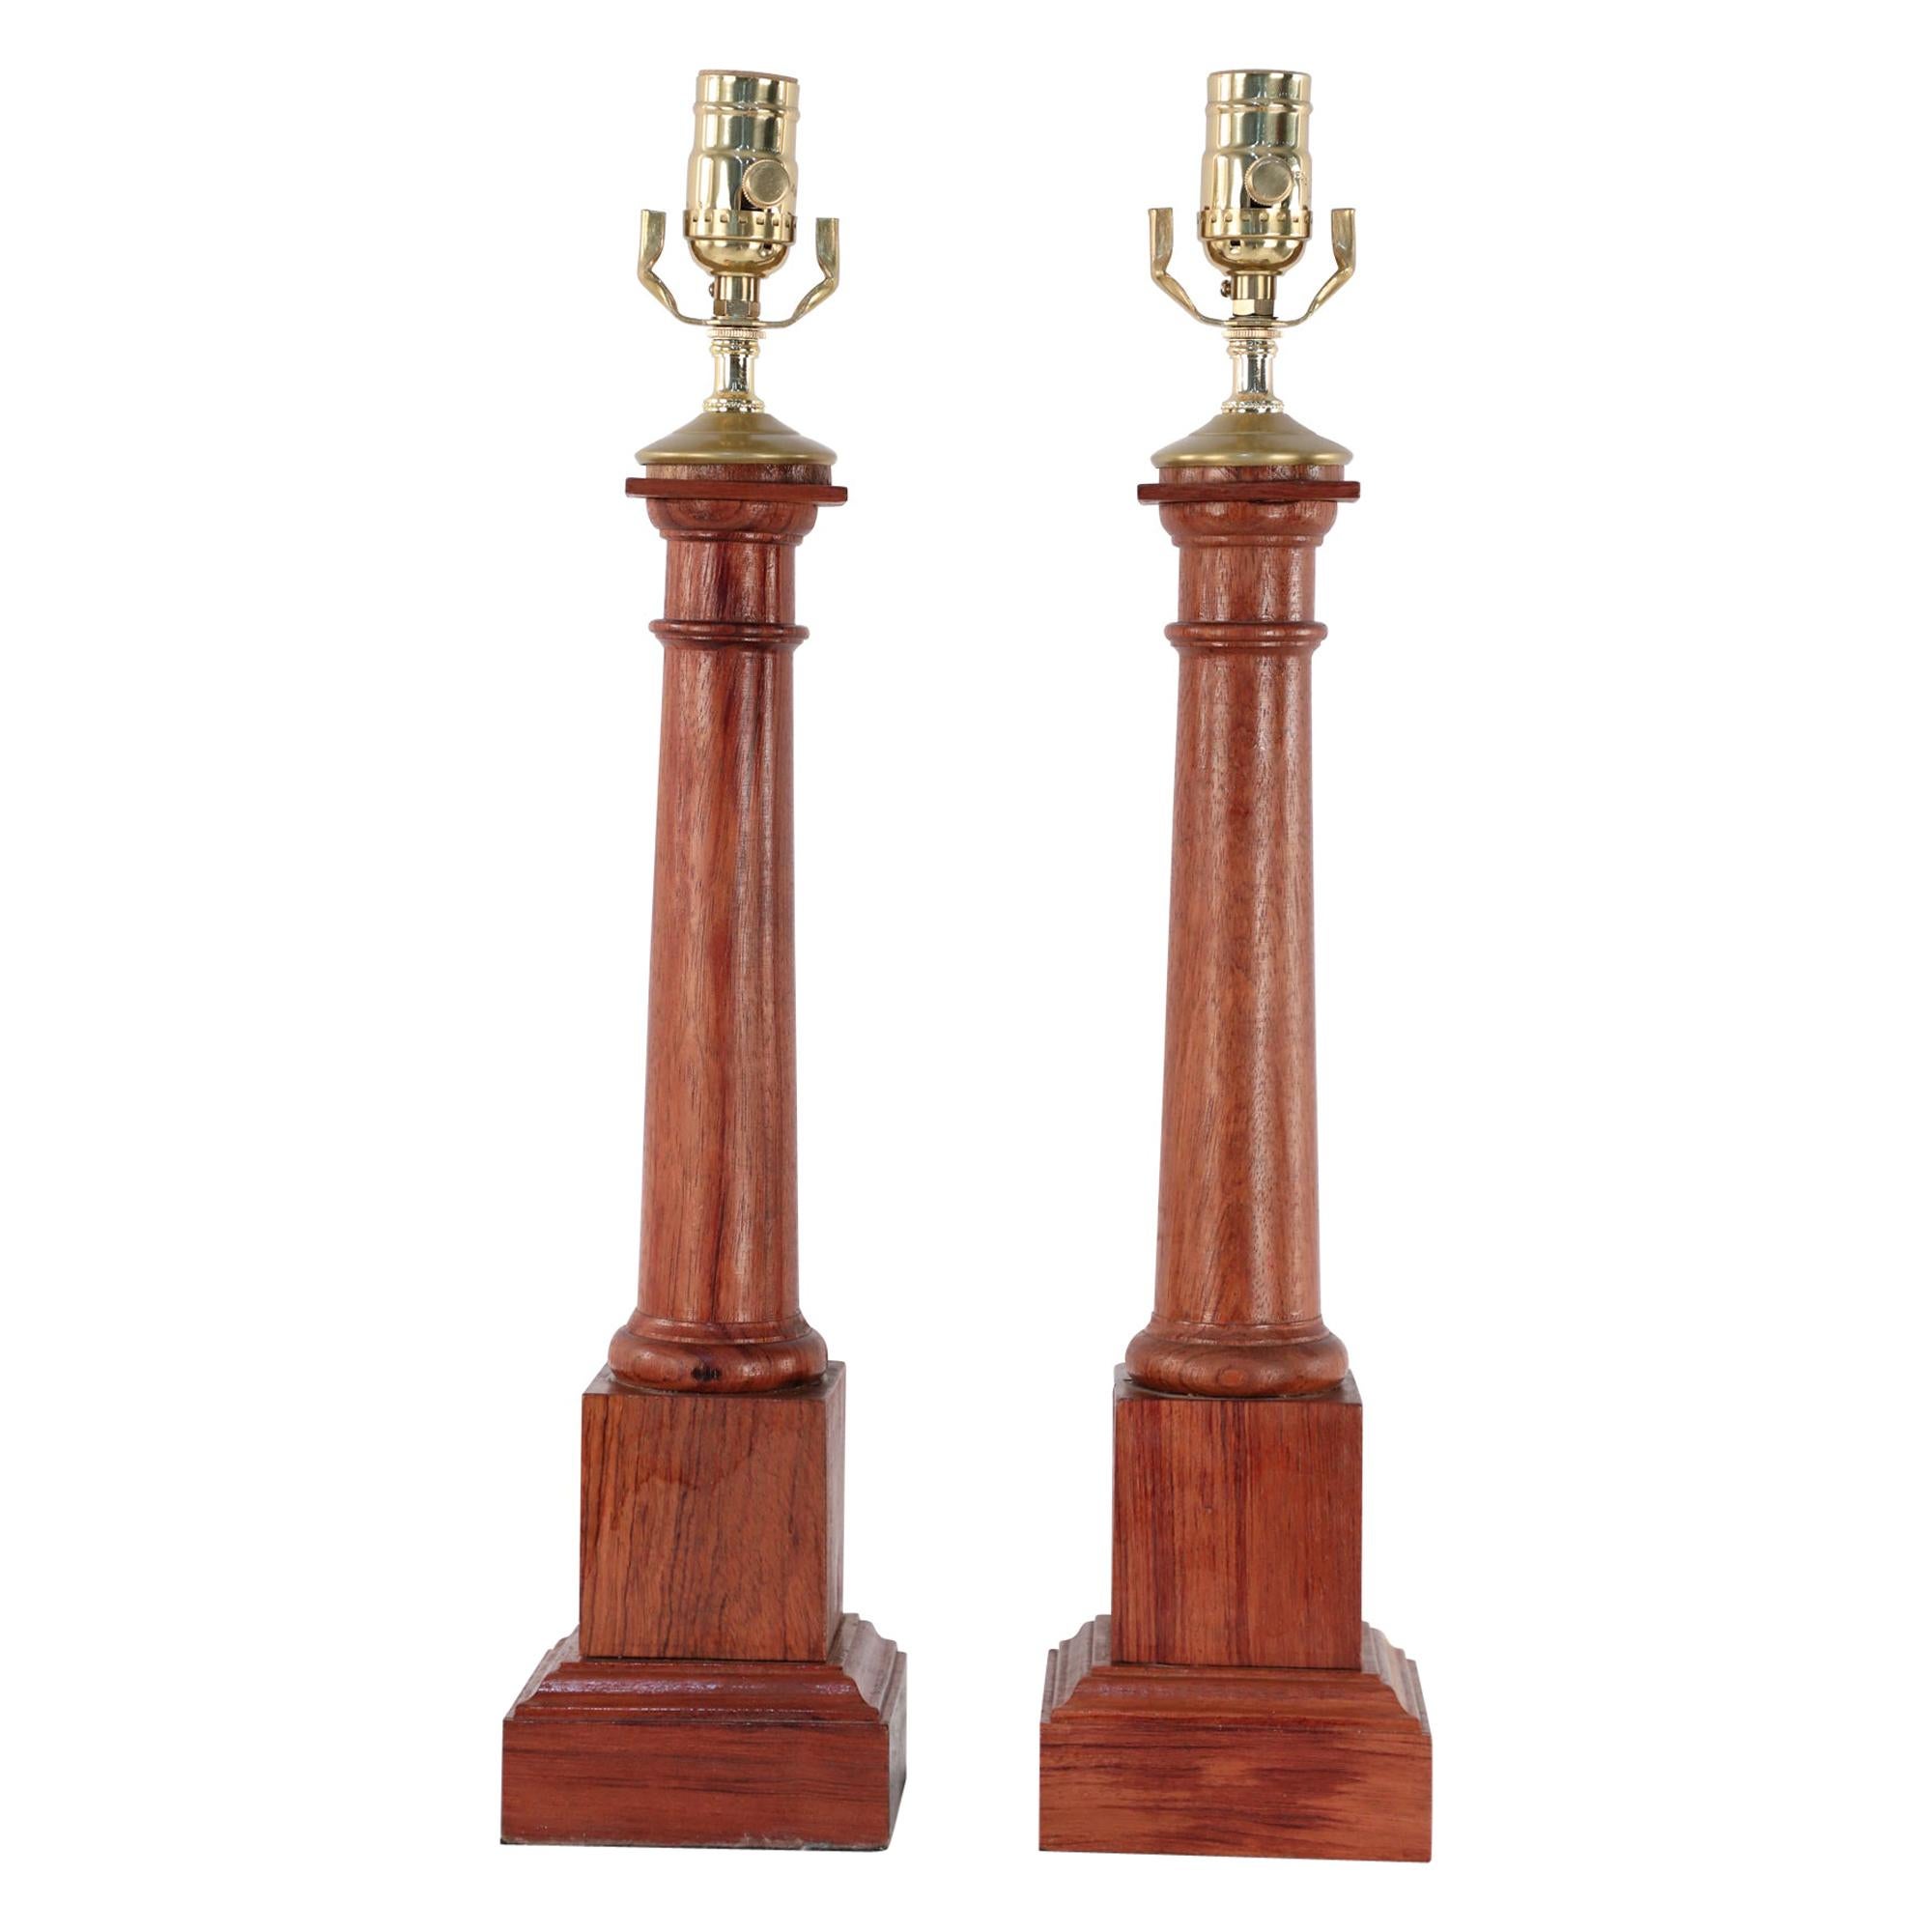 Pair of Neoclassical Style Wooden Column Table Lamps